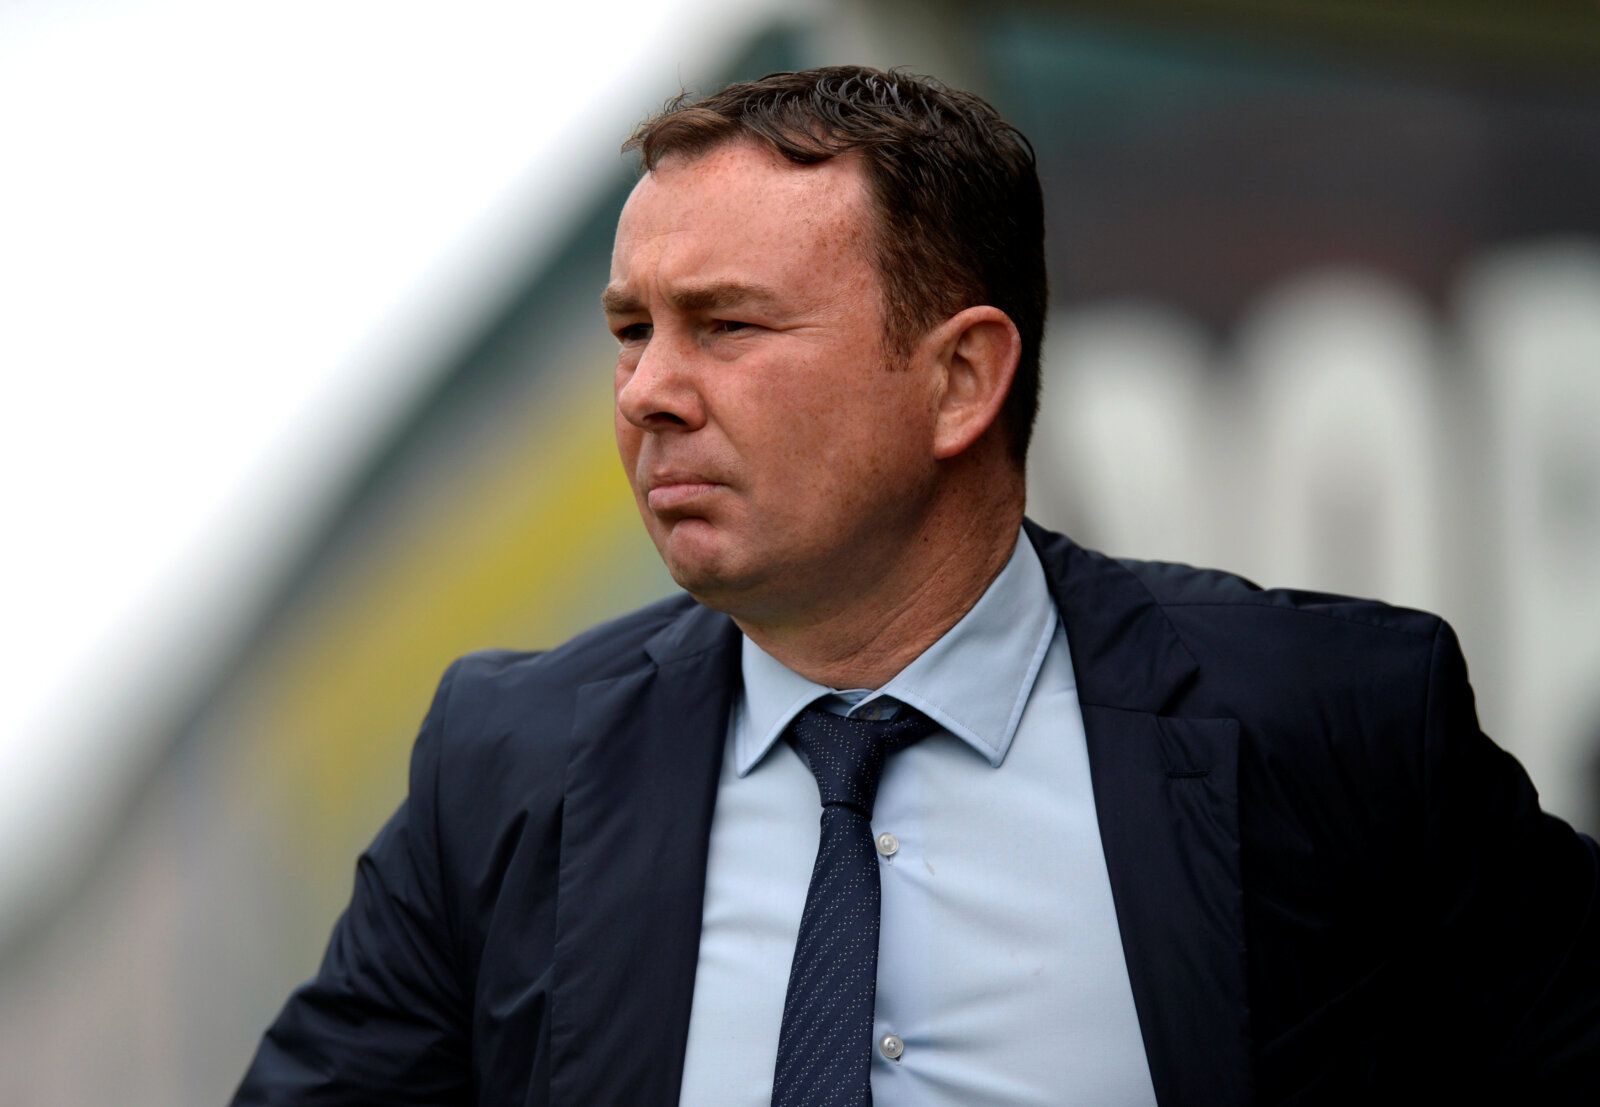 Soccer Football - League One - Plymouth Argyle v Barnsley - Home Park, Plymouth, Britain - April 22, 2019  Plymouth Argyle manager Derek Adams  Action Images/Adam Holt  EDITORIAL USE ONLY. No use with unauthorized audio, video, data, fixture lists, club/league logos or 